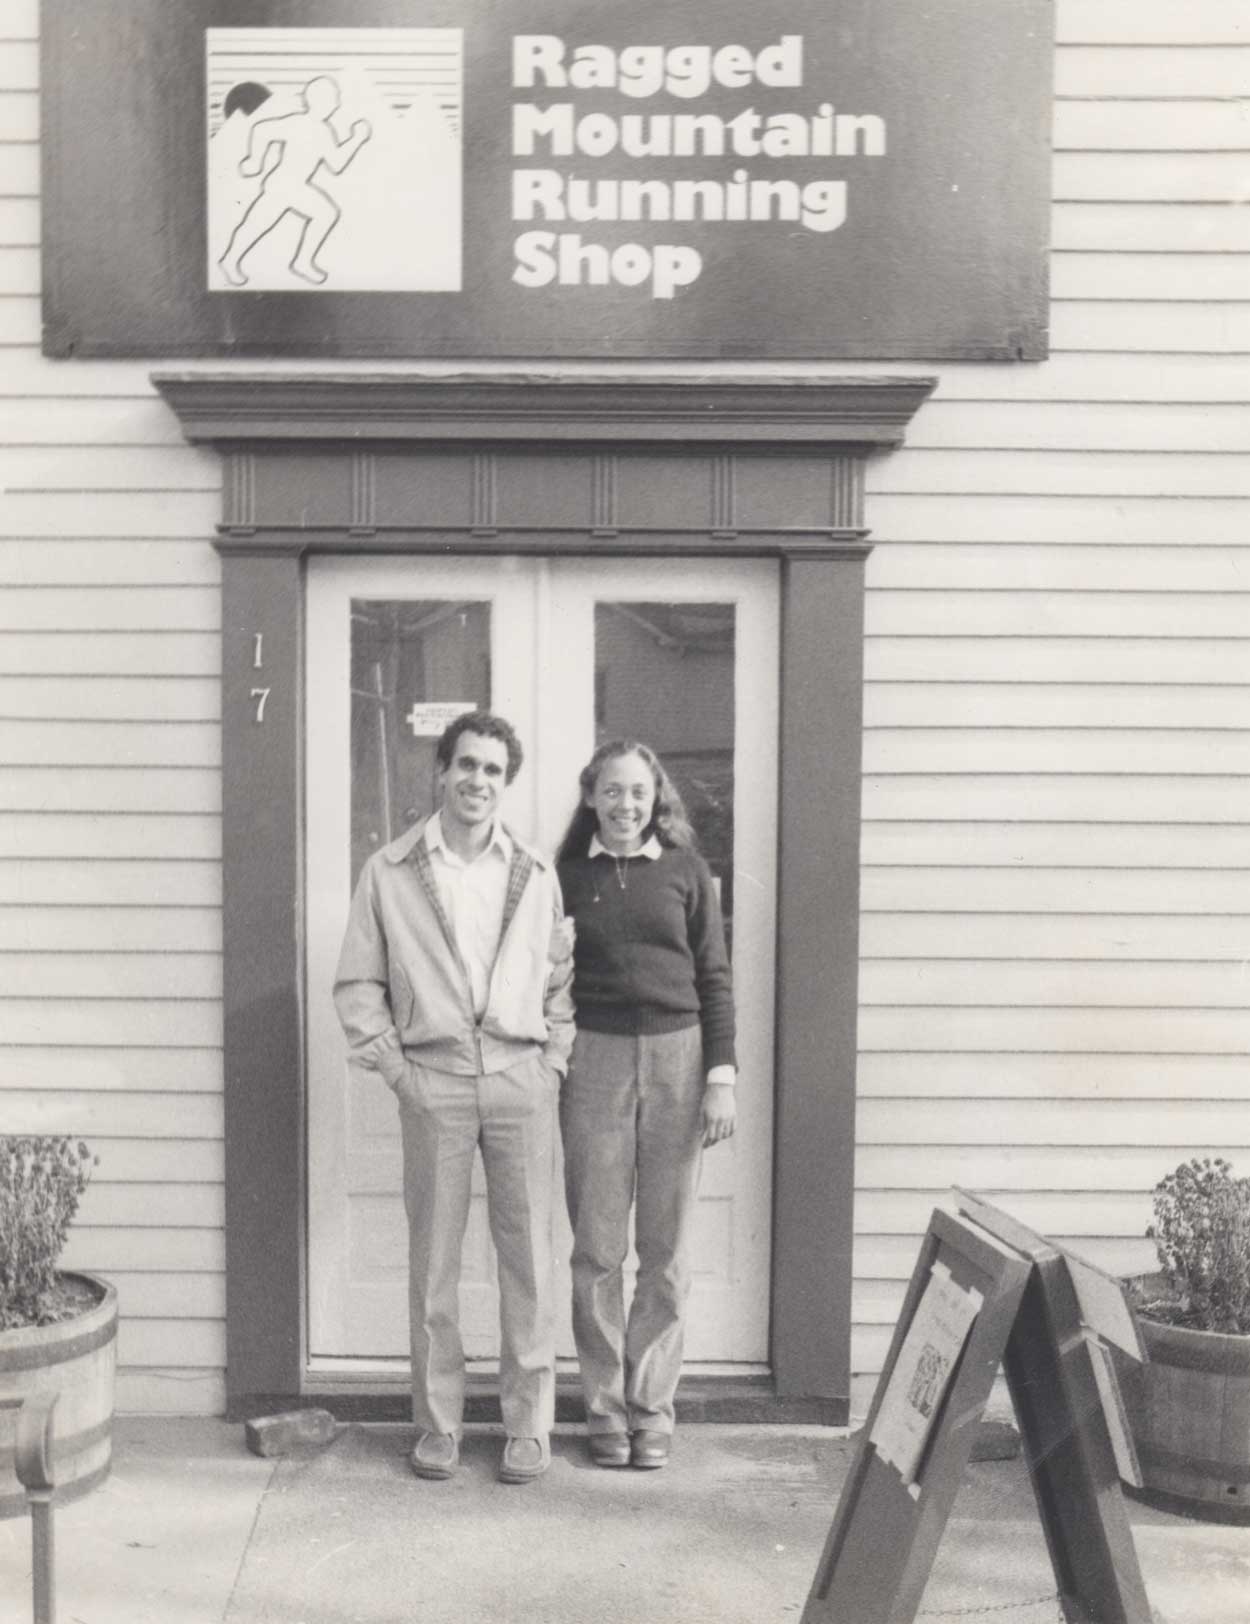 Black and white photo of Mark and Cynthia Lorenzoni standing in front of the entrance to a shop with the sign 'Ragged Mountain Running Shop'